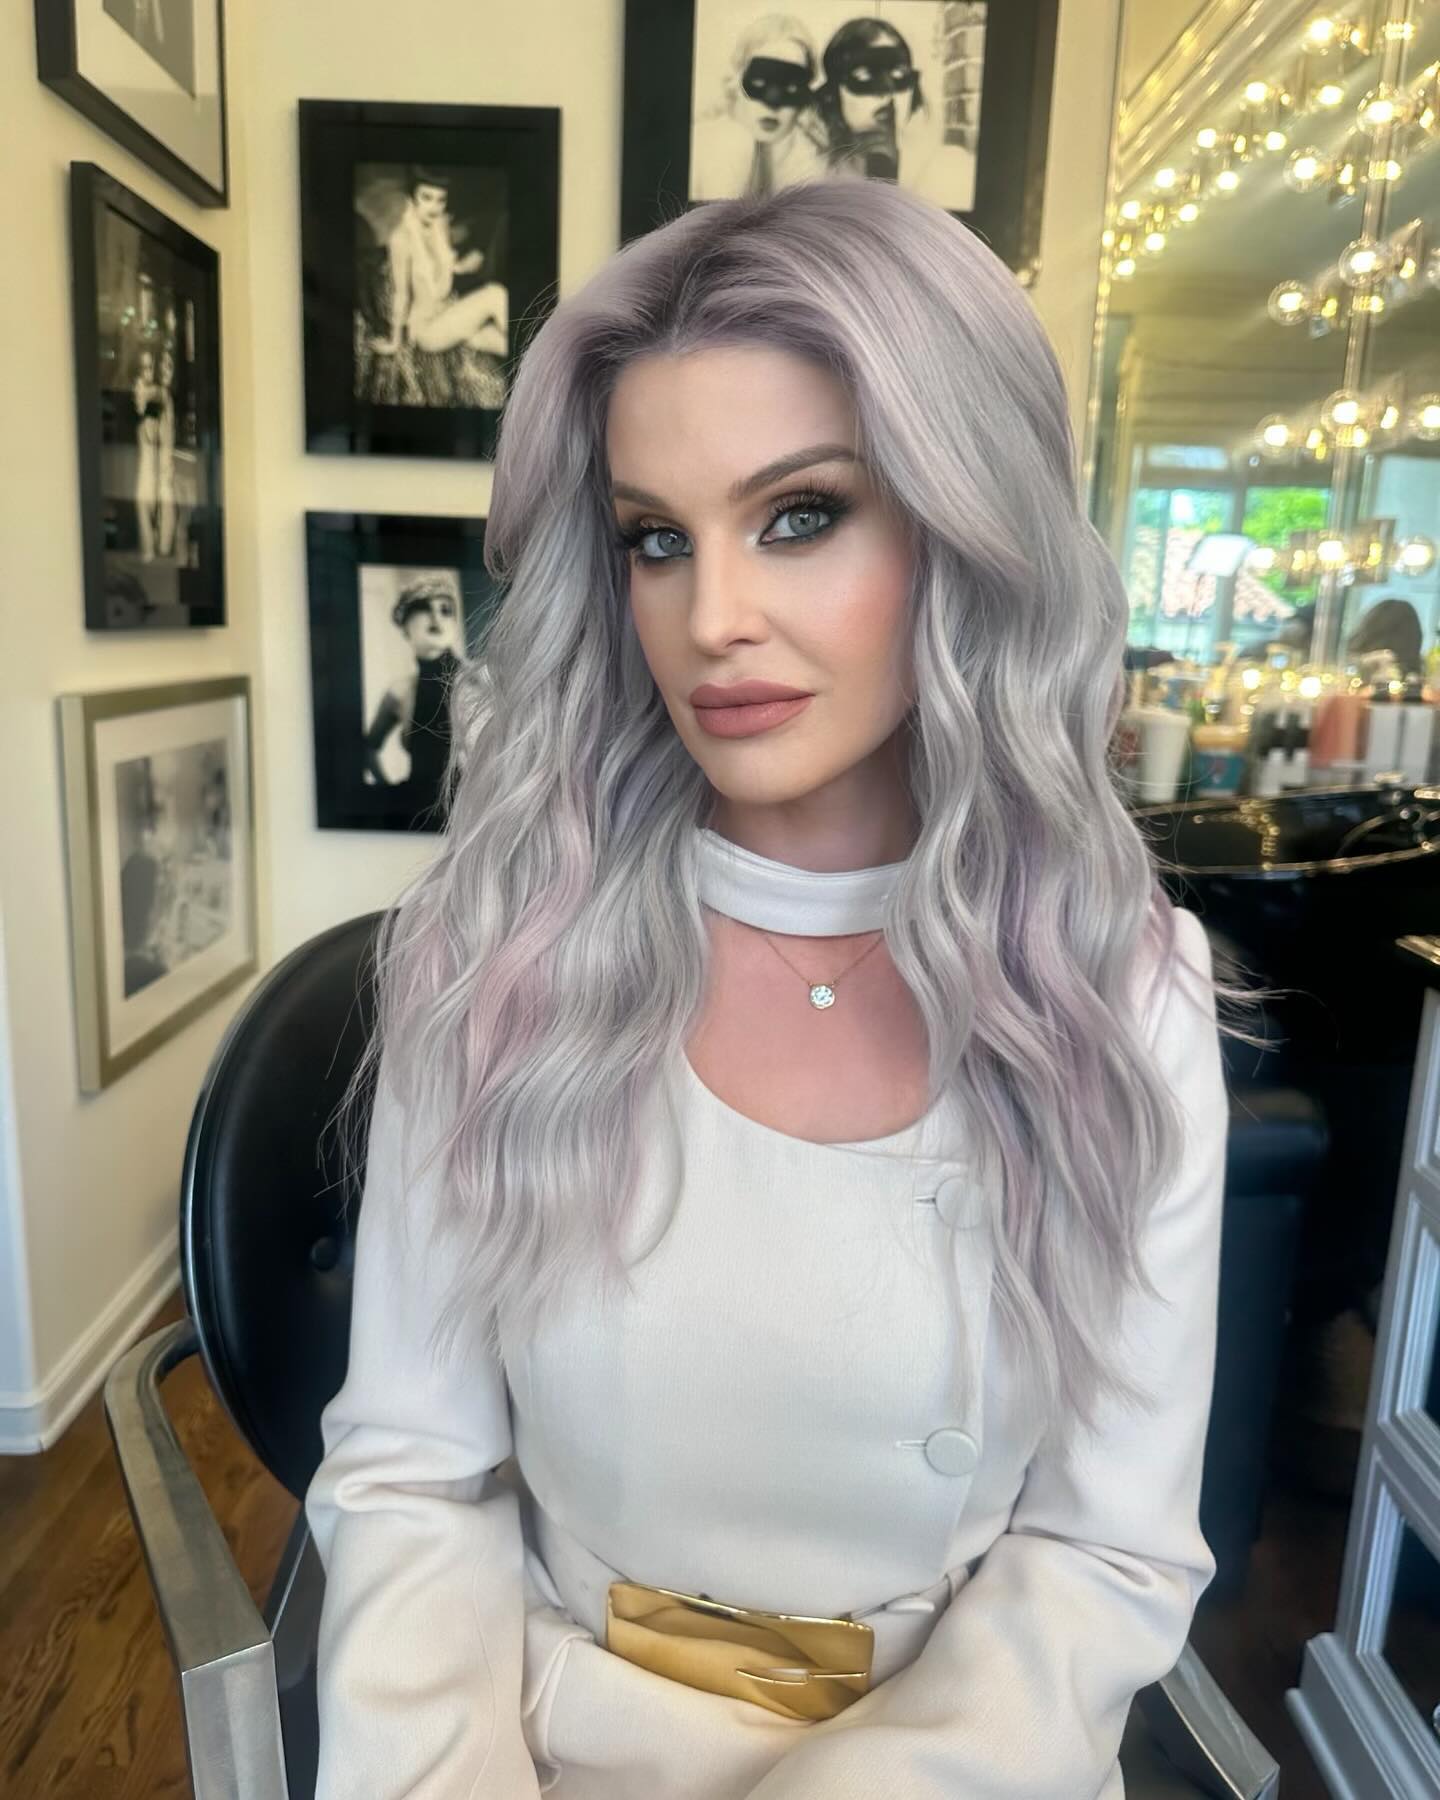 Kelly added a blond tint to her purple-gray locks